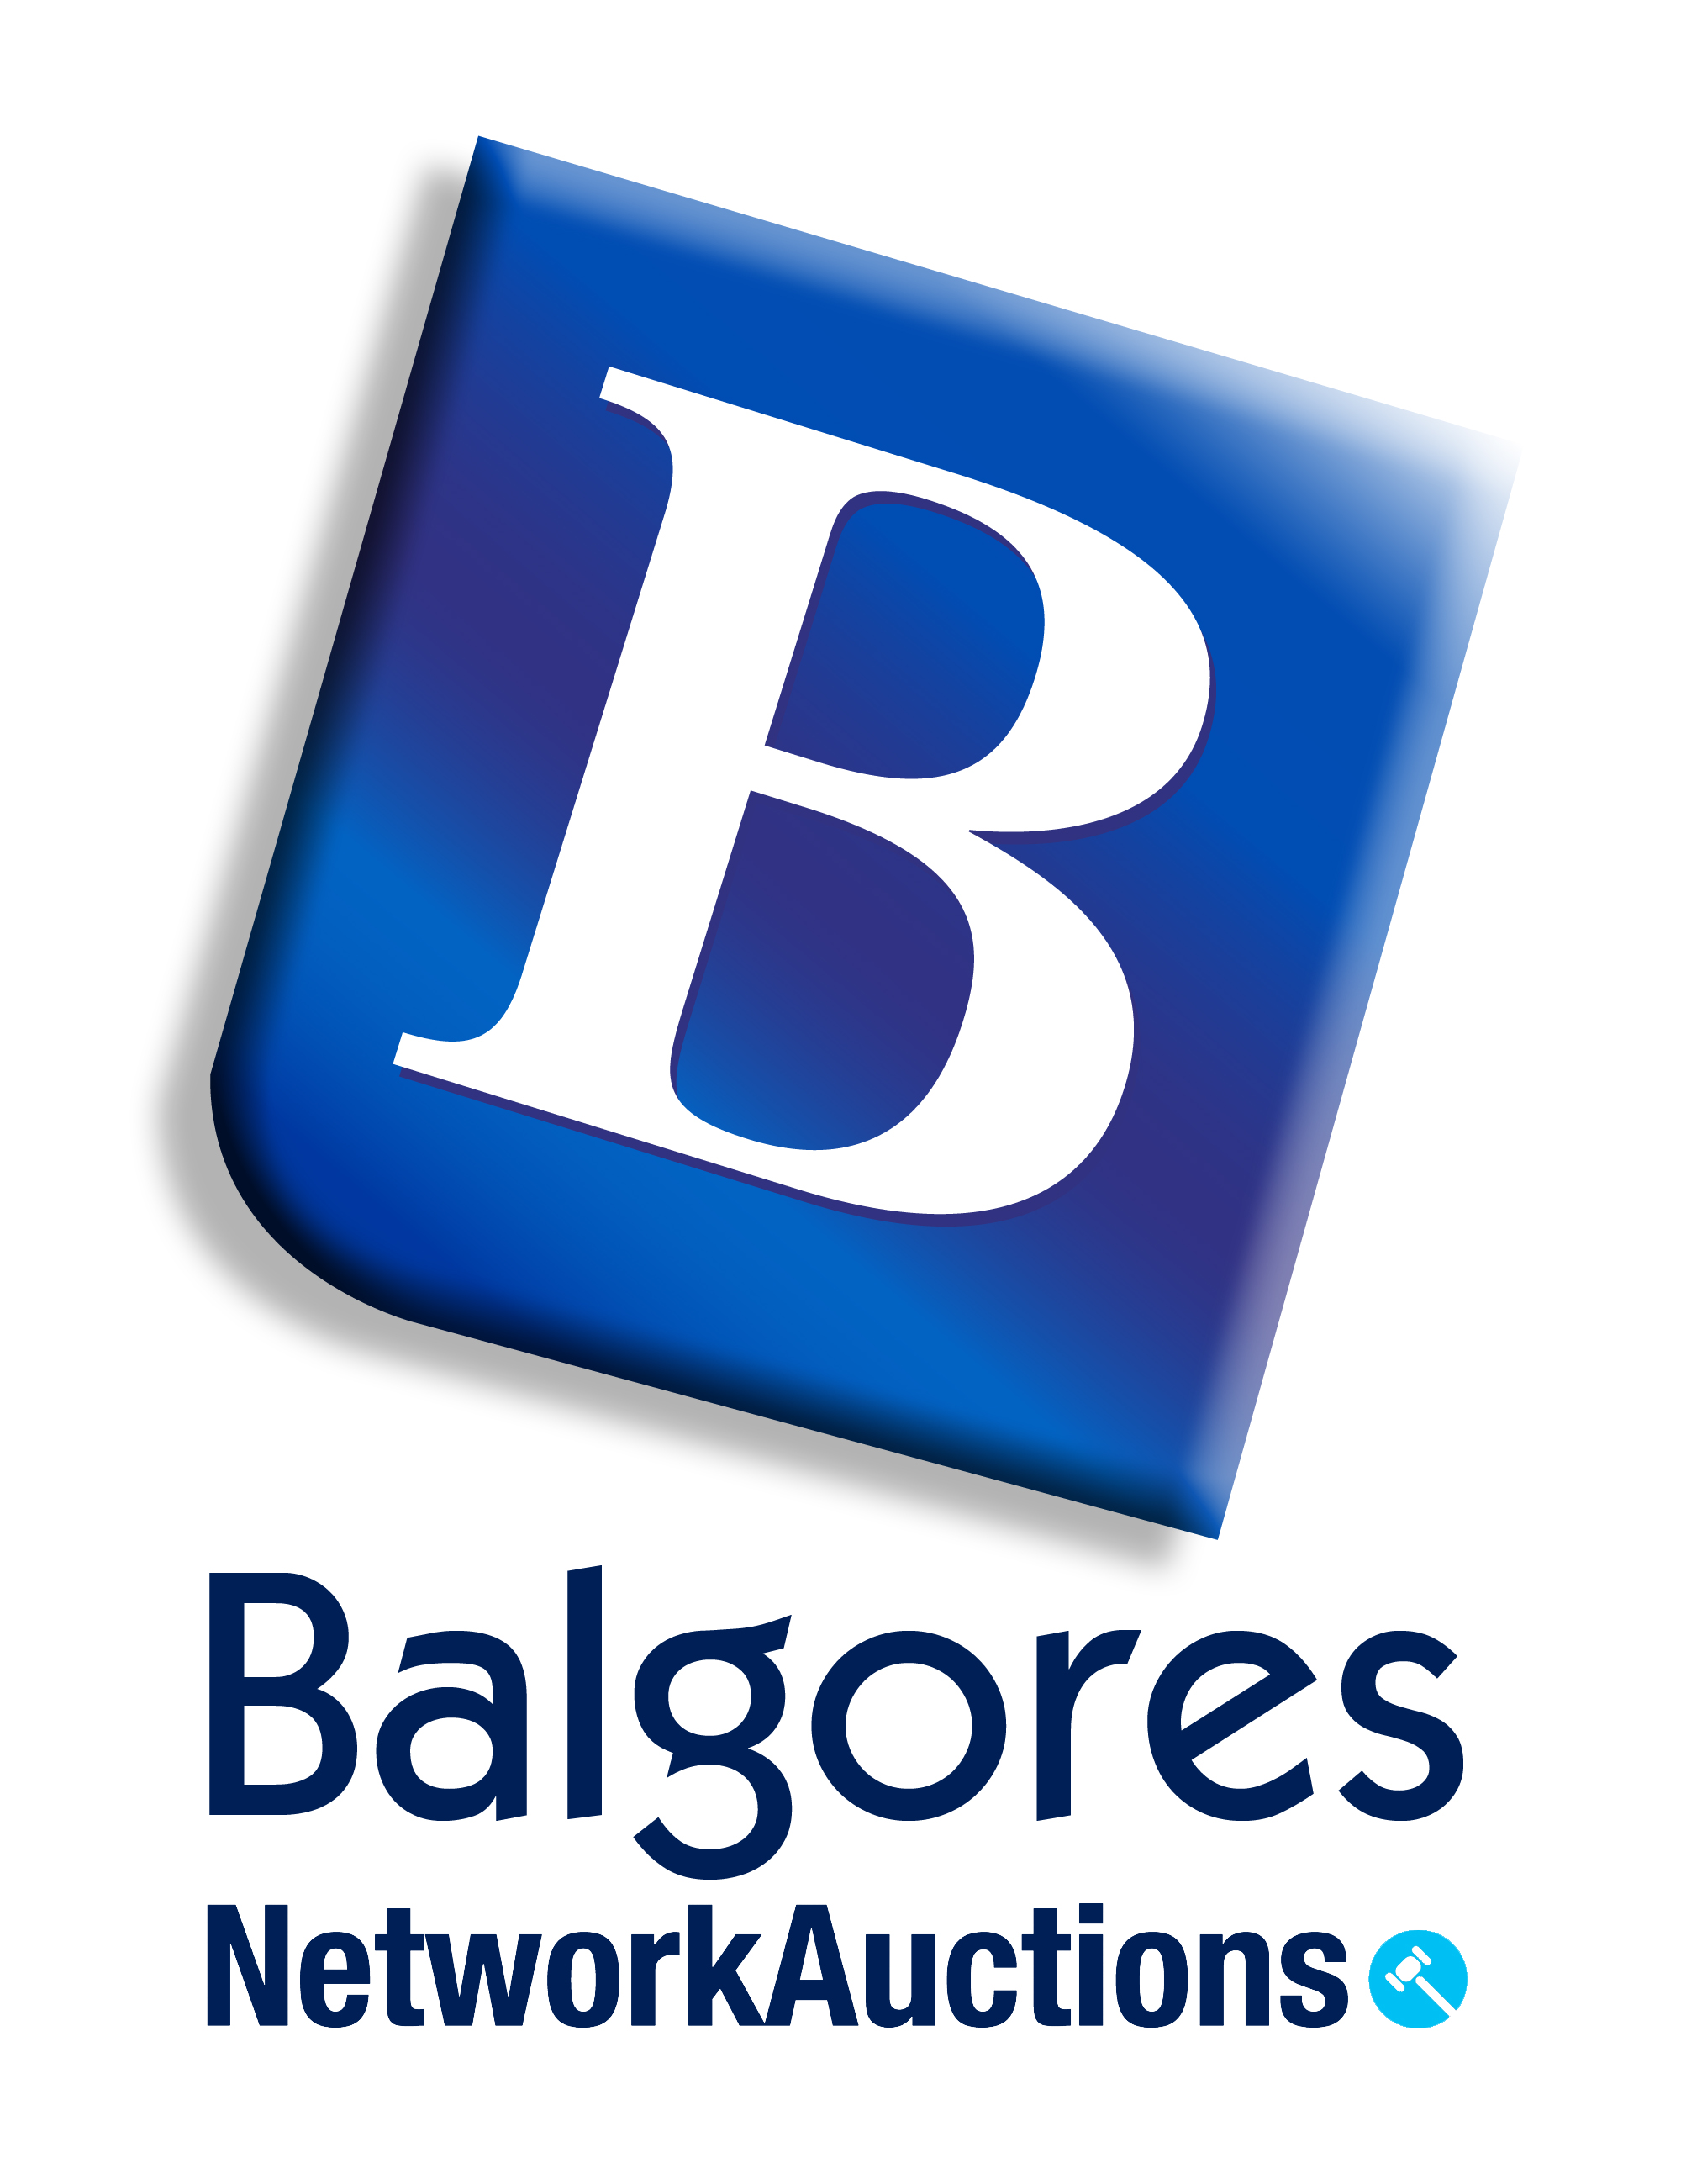 Contact Balgores Upminster on 01708 259539